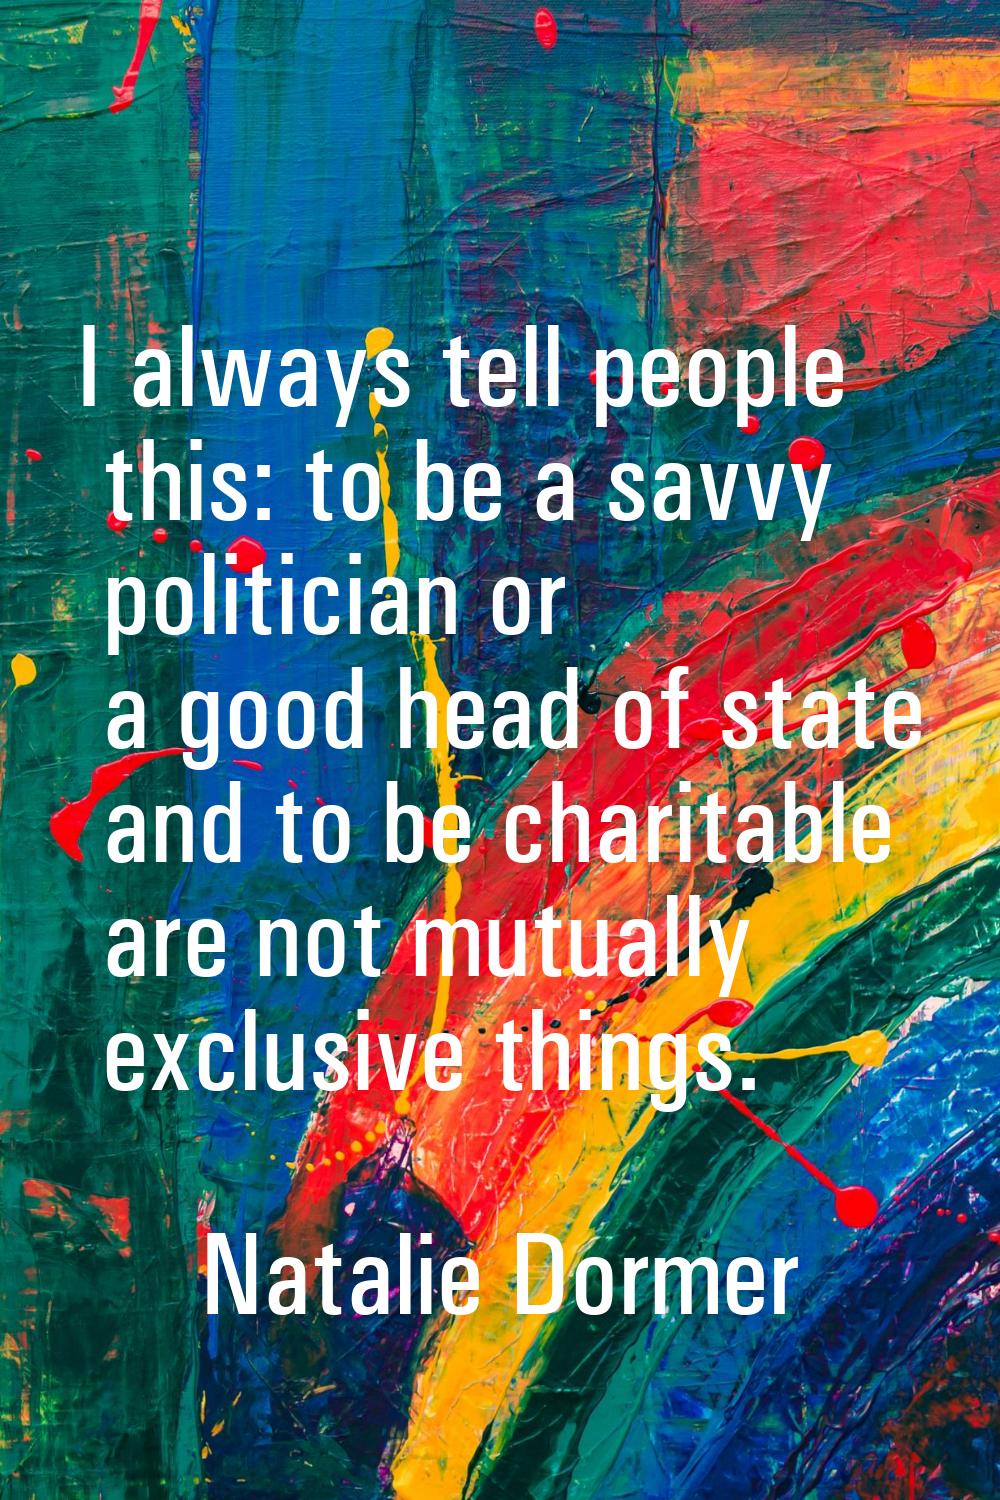 I always tell people this: to be a savvy politician or a good head of state and to be charitable ar